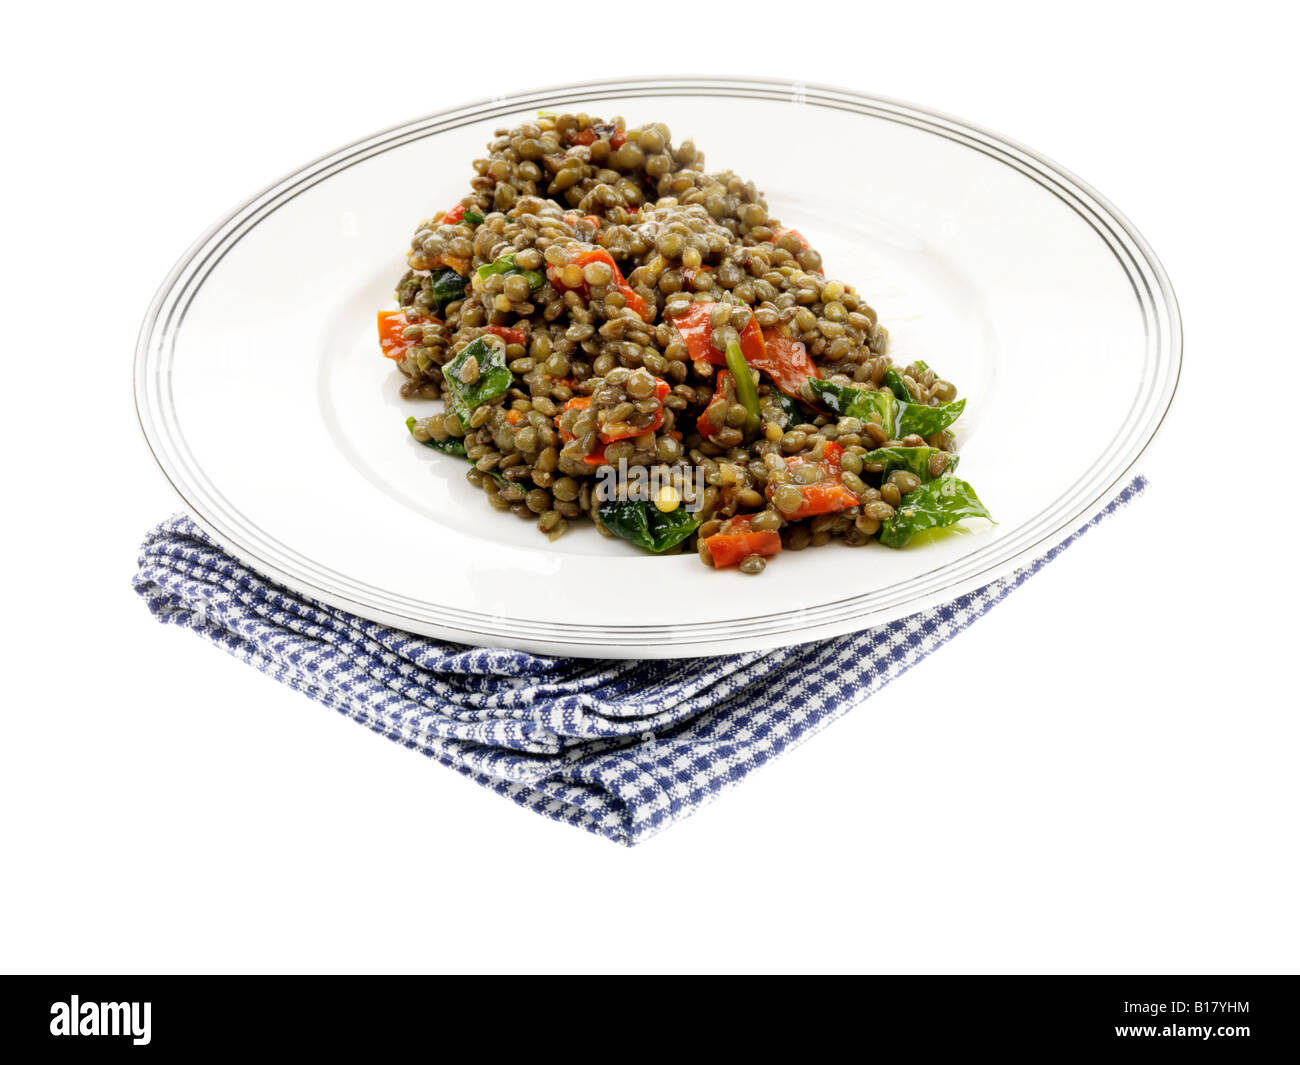 Green Lentil Red Pepper and Spinach Salad Stock Photo